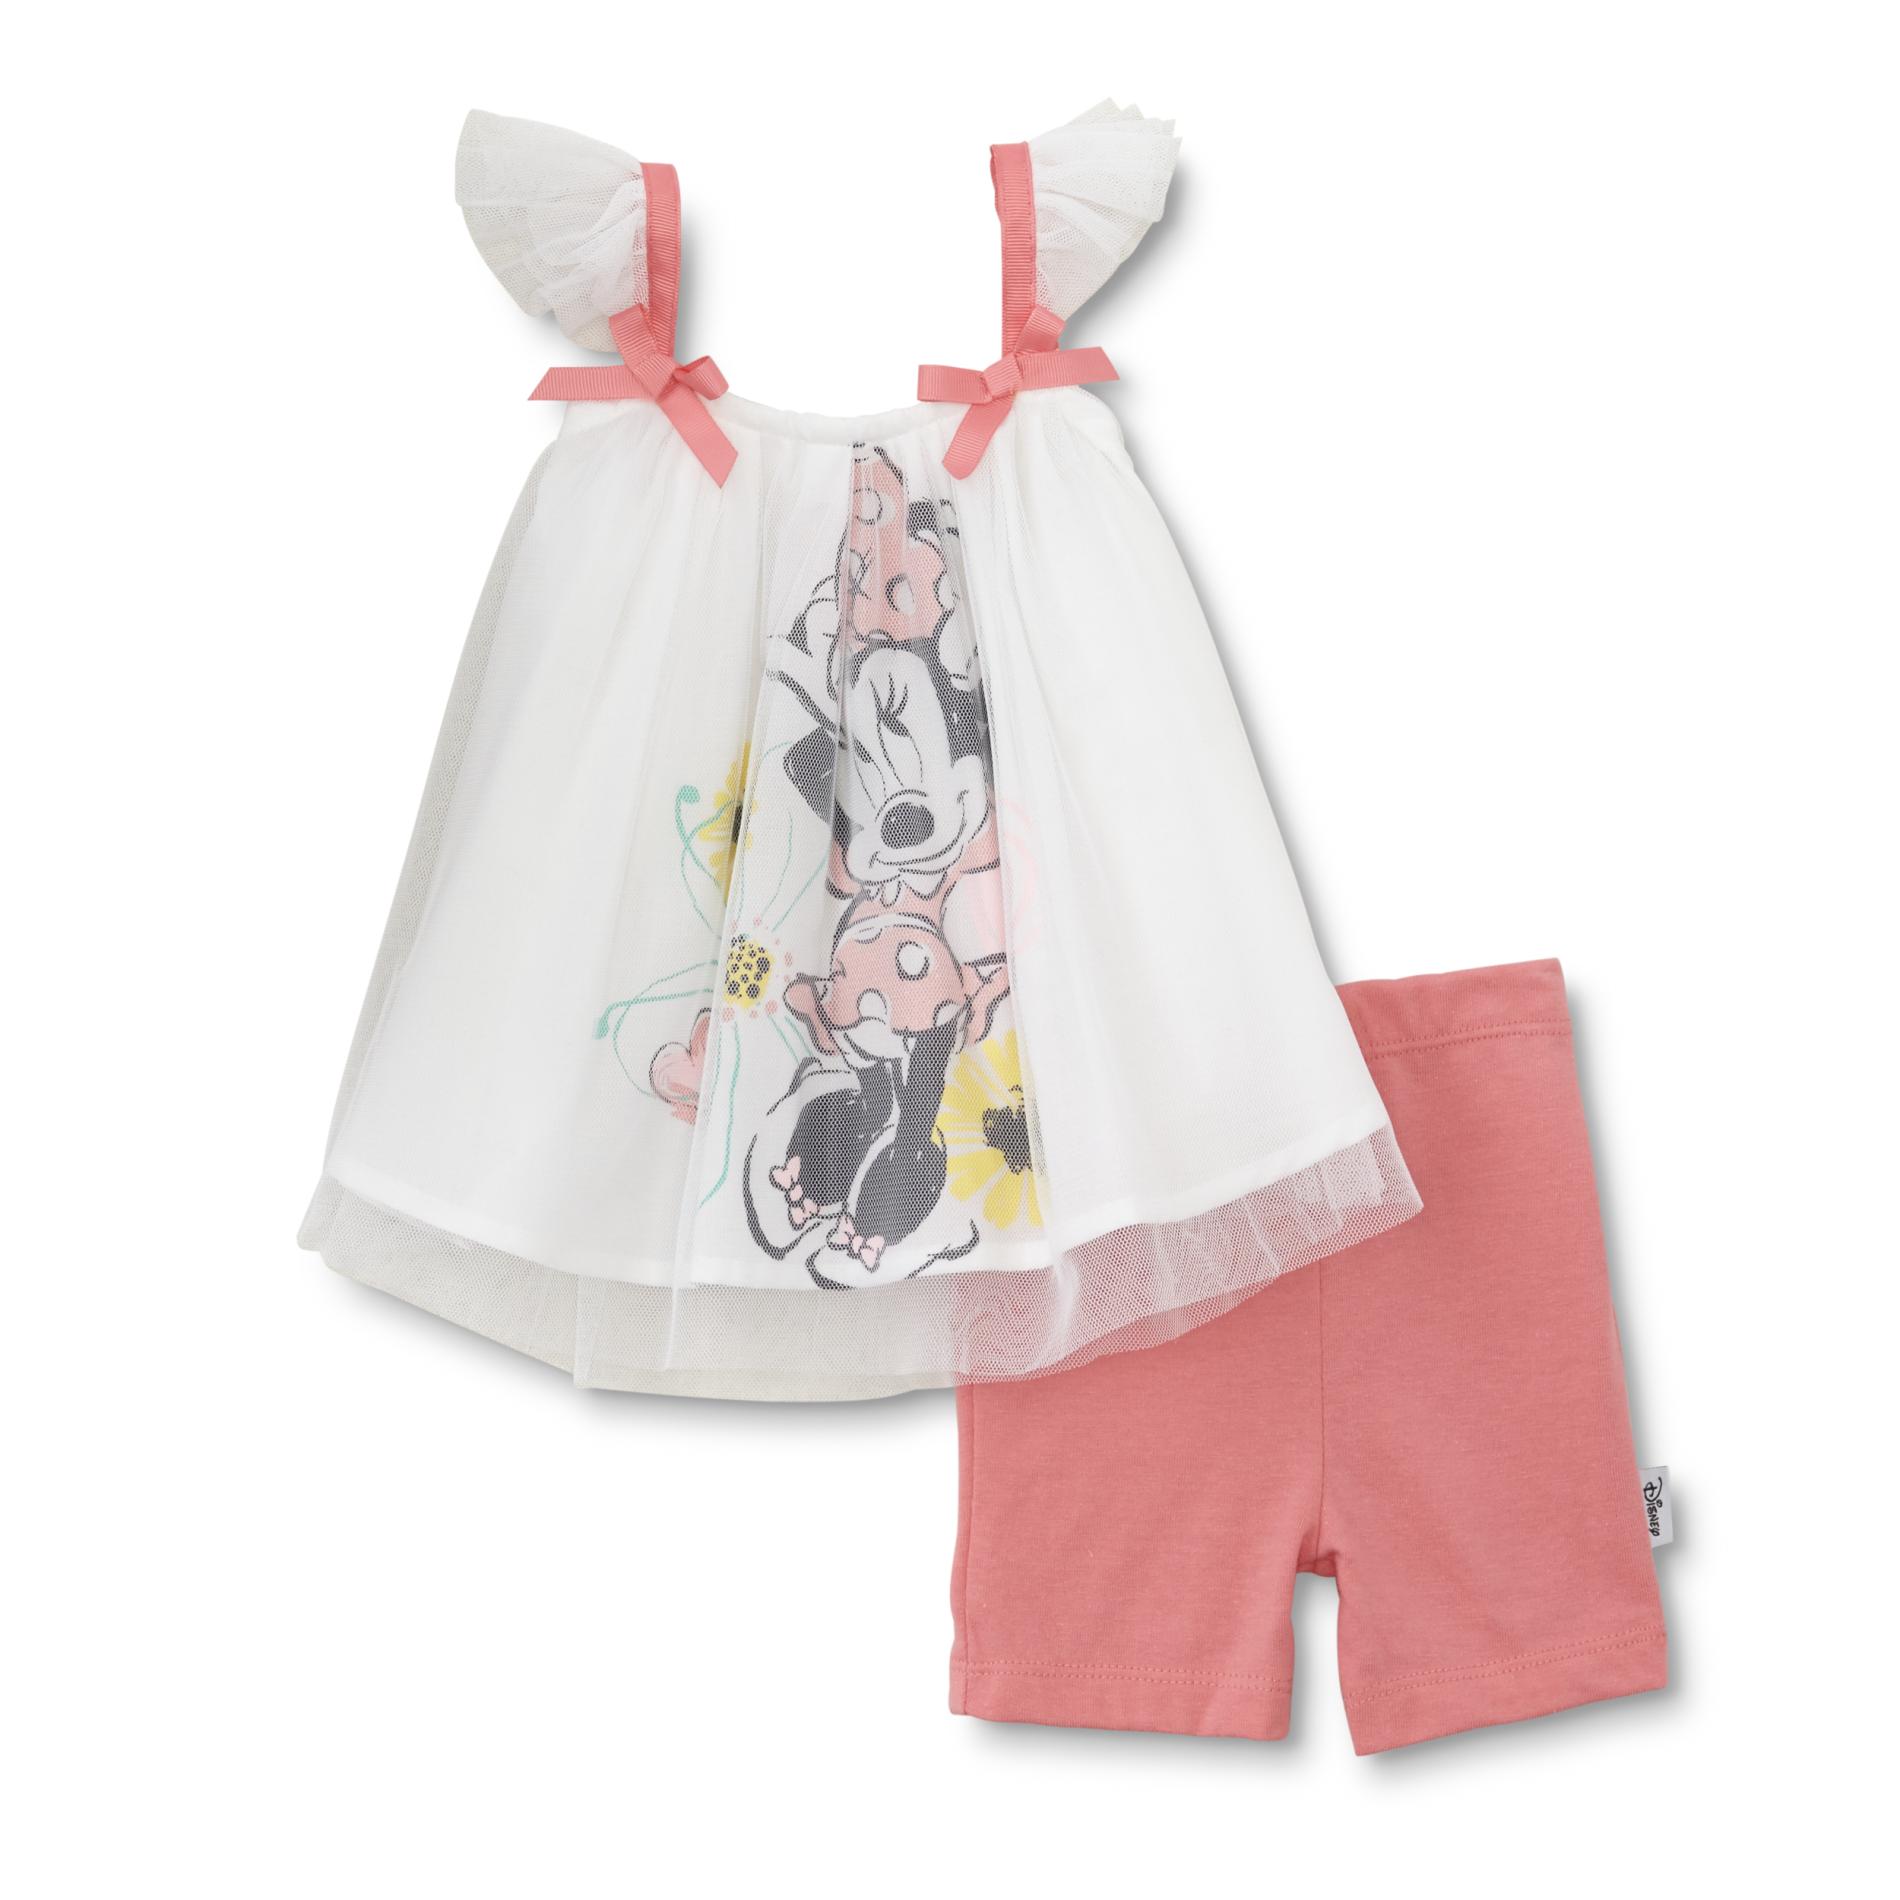 Minnie Mouse Infant Girl's Tank Top & Shorts